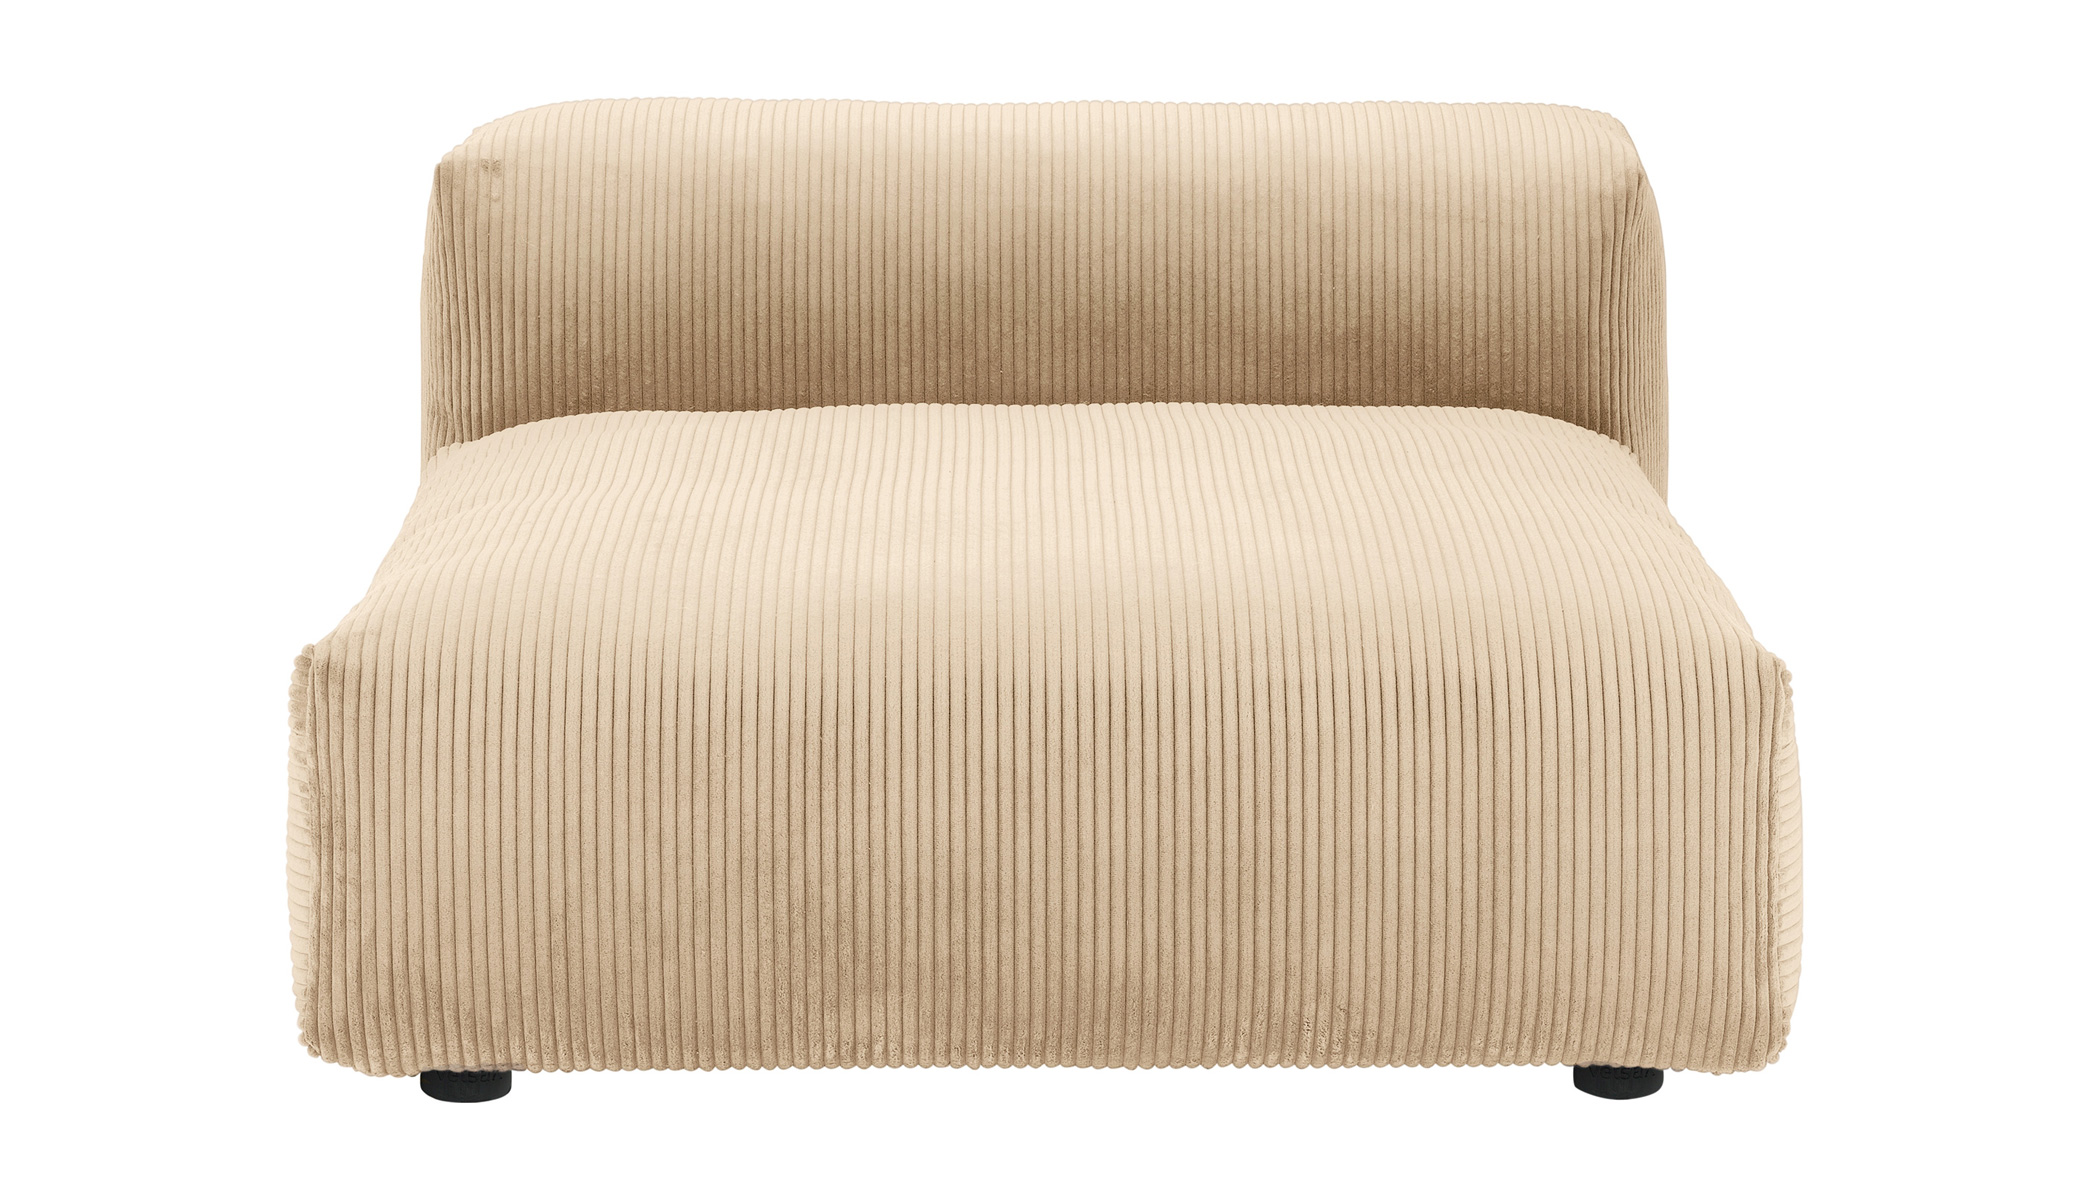  Sofa 1 Large 1 Side  Cord Velours sand